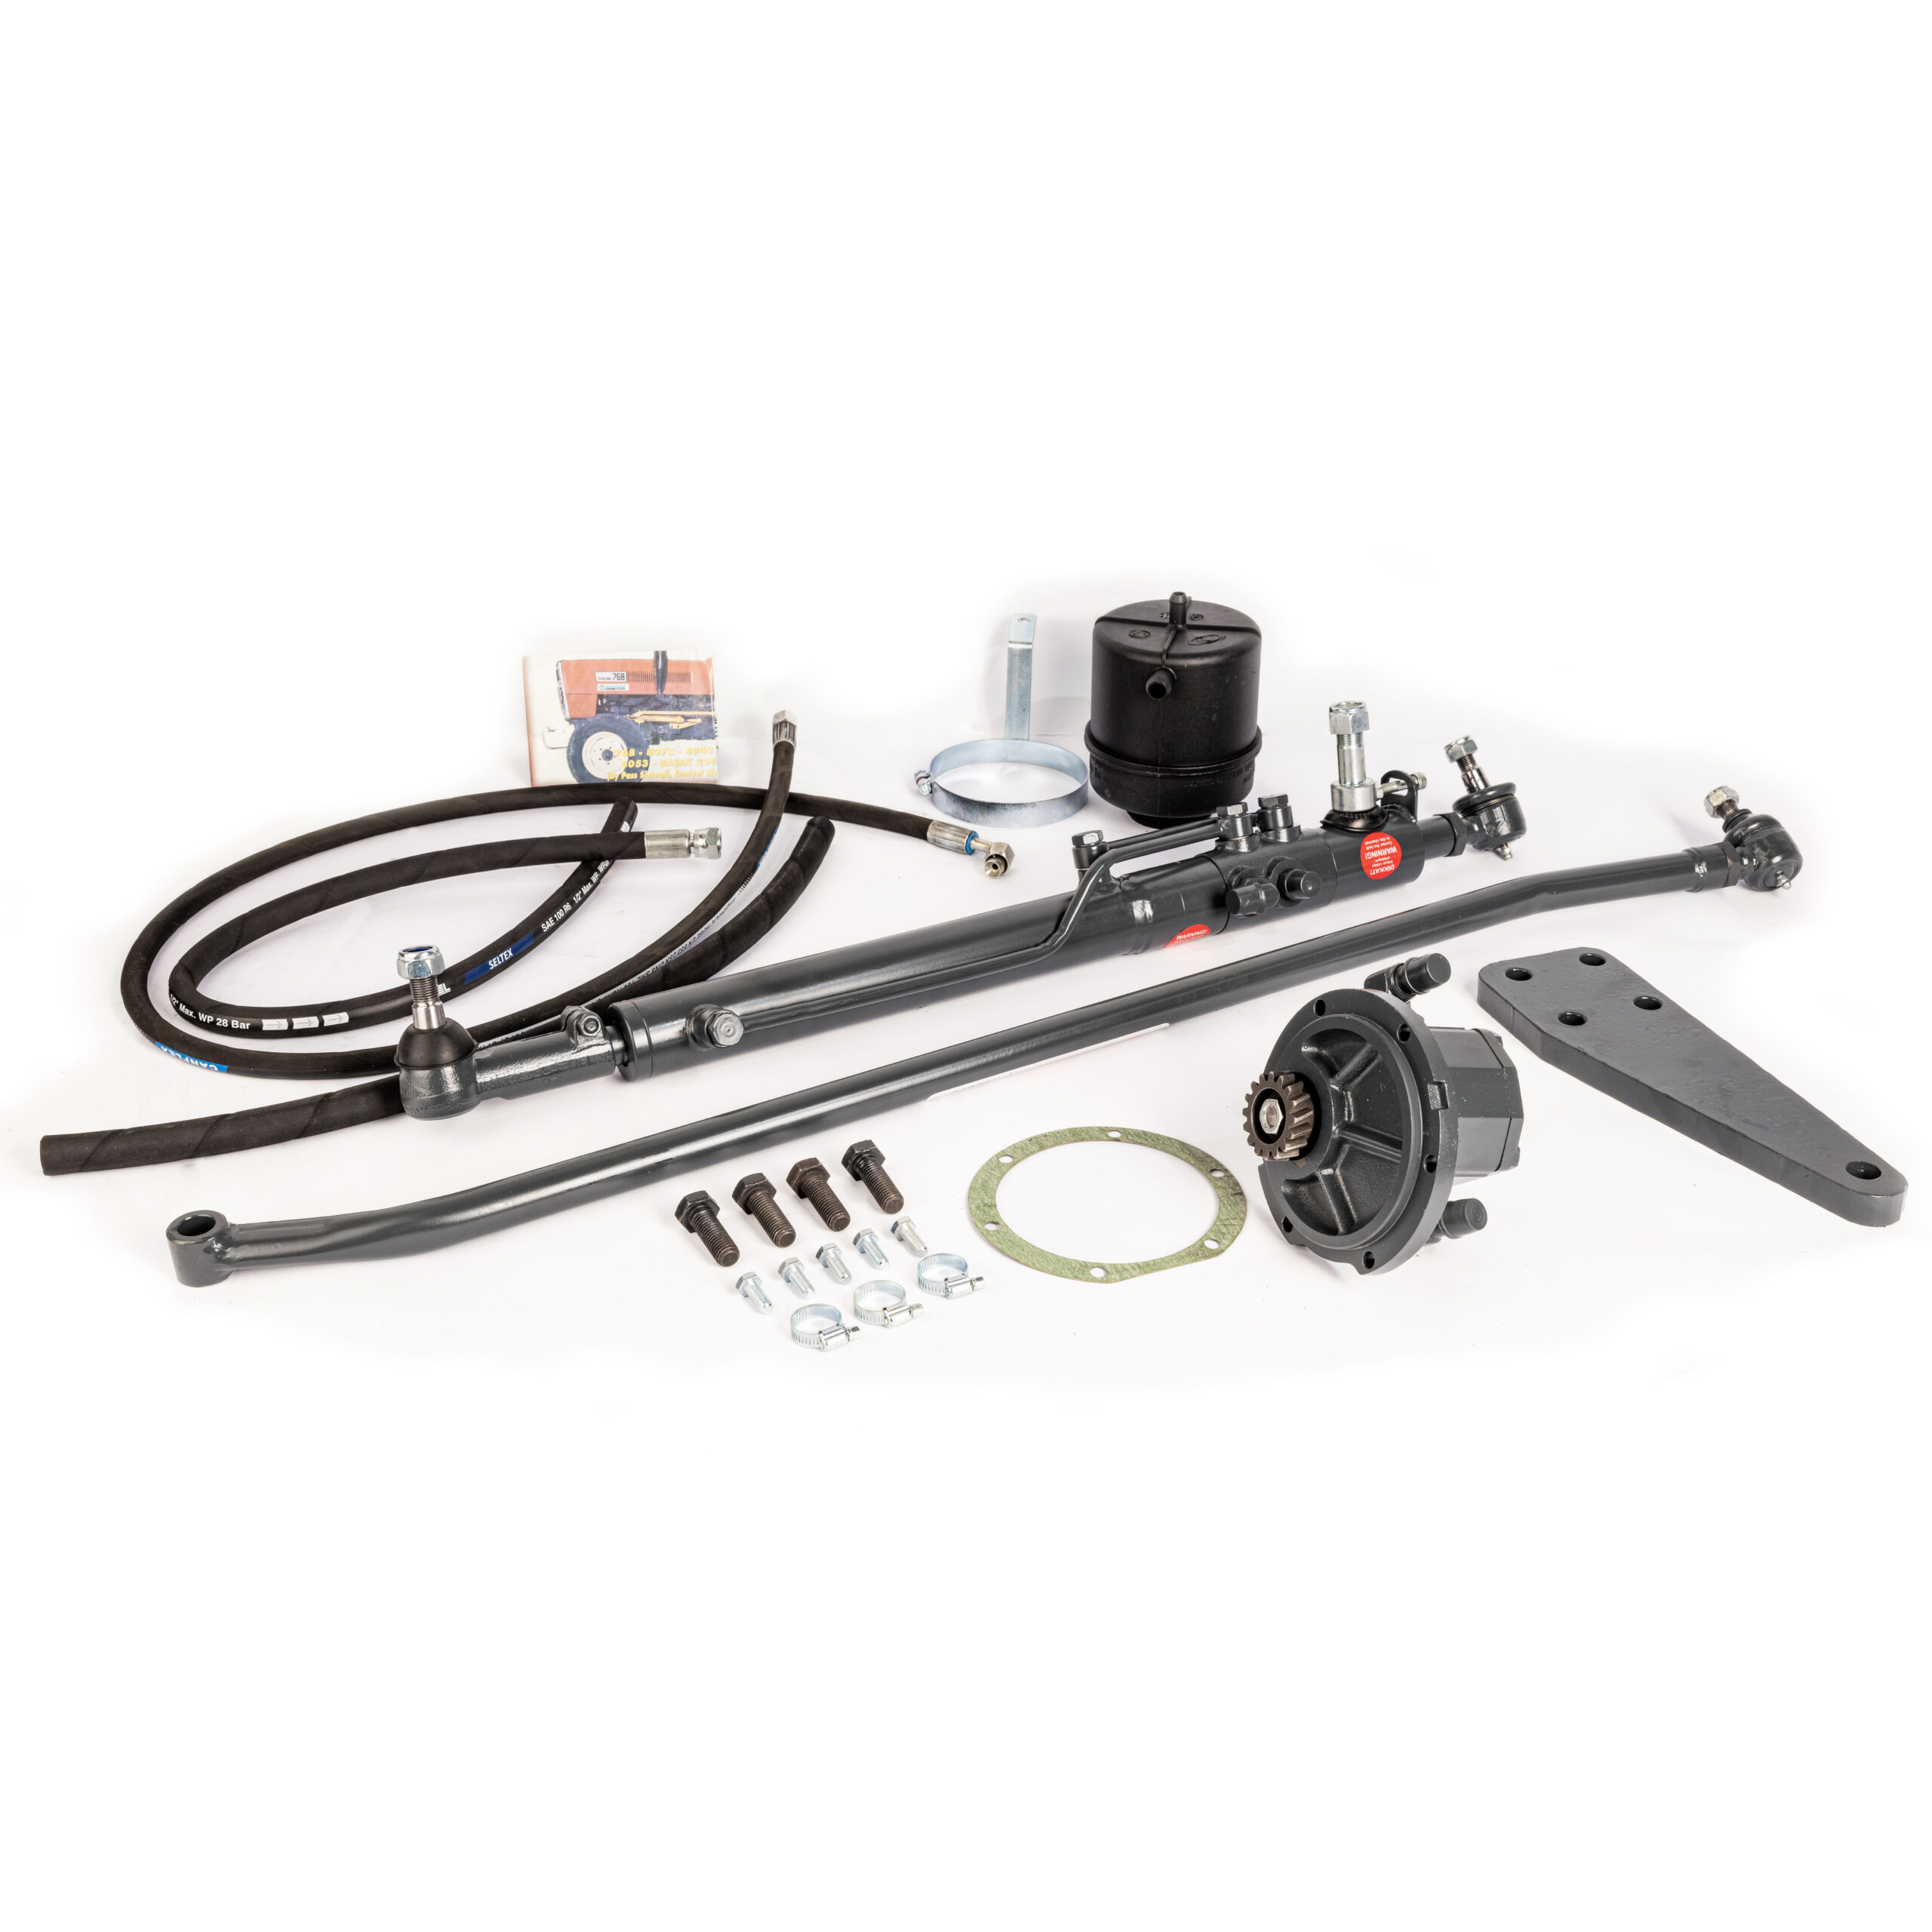 Power Steering Conversion Kit for Steyr 768